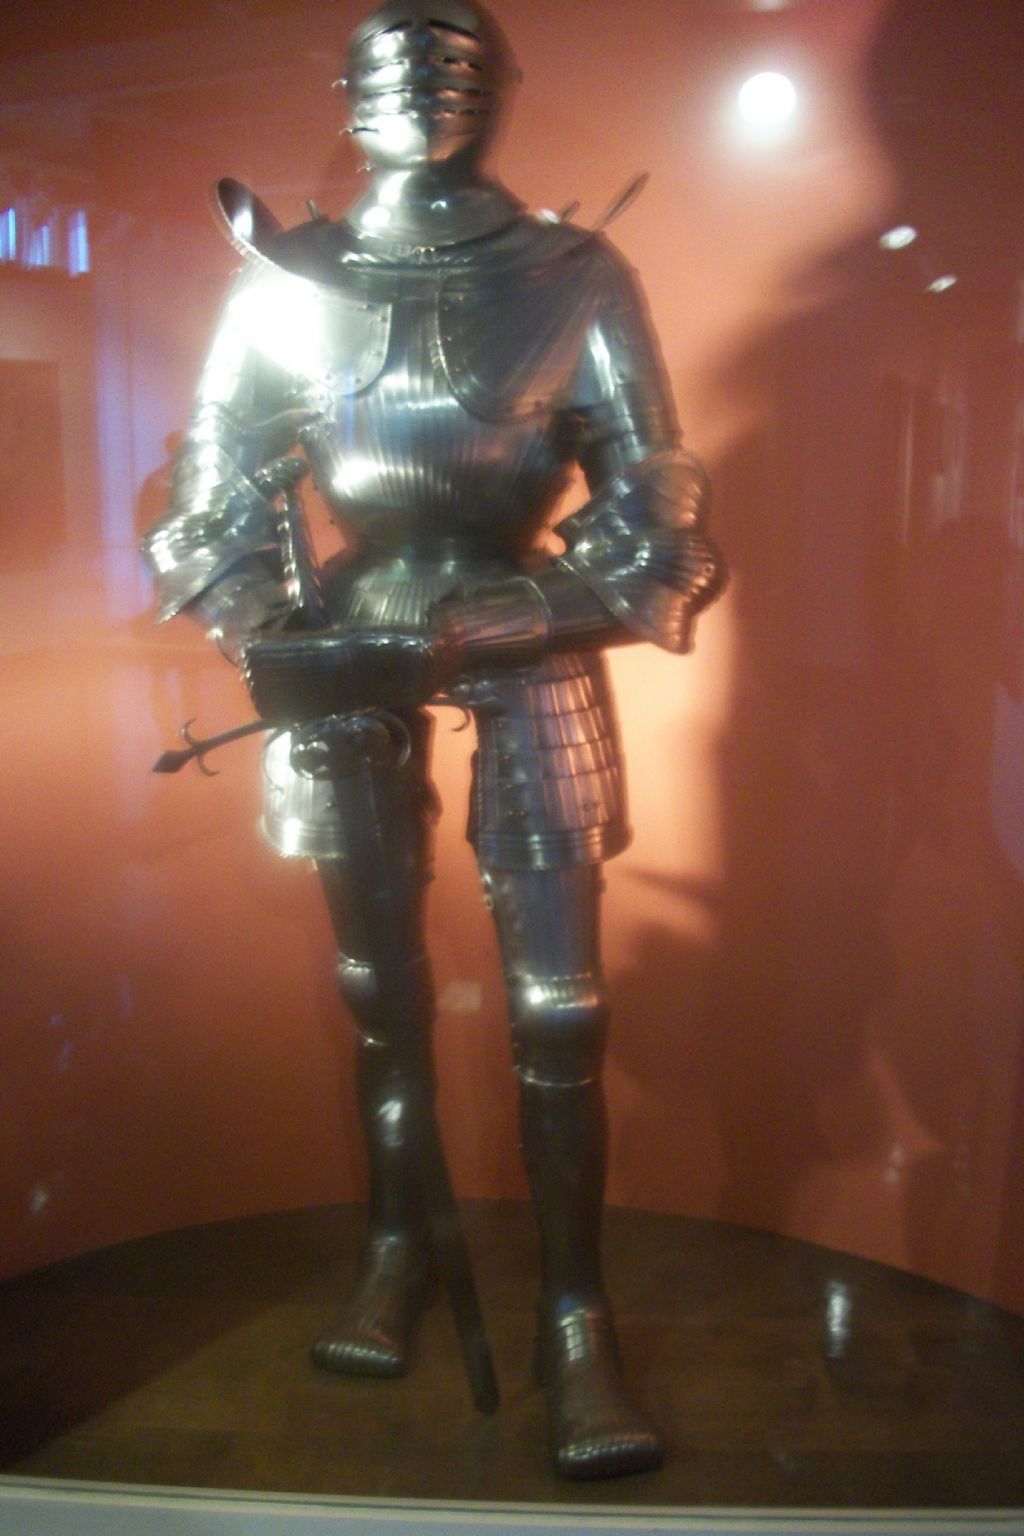 Suit of Armor